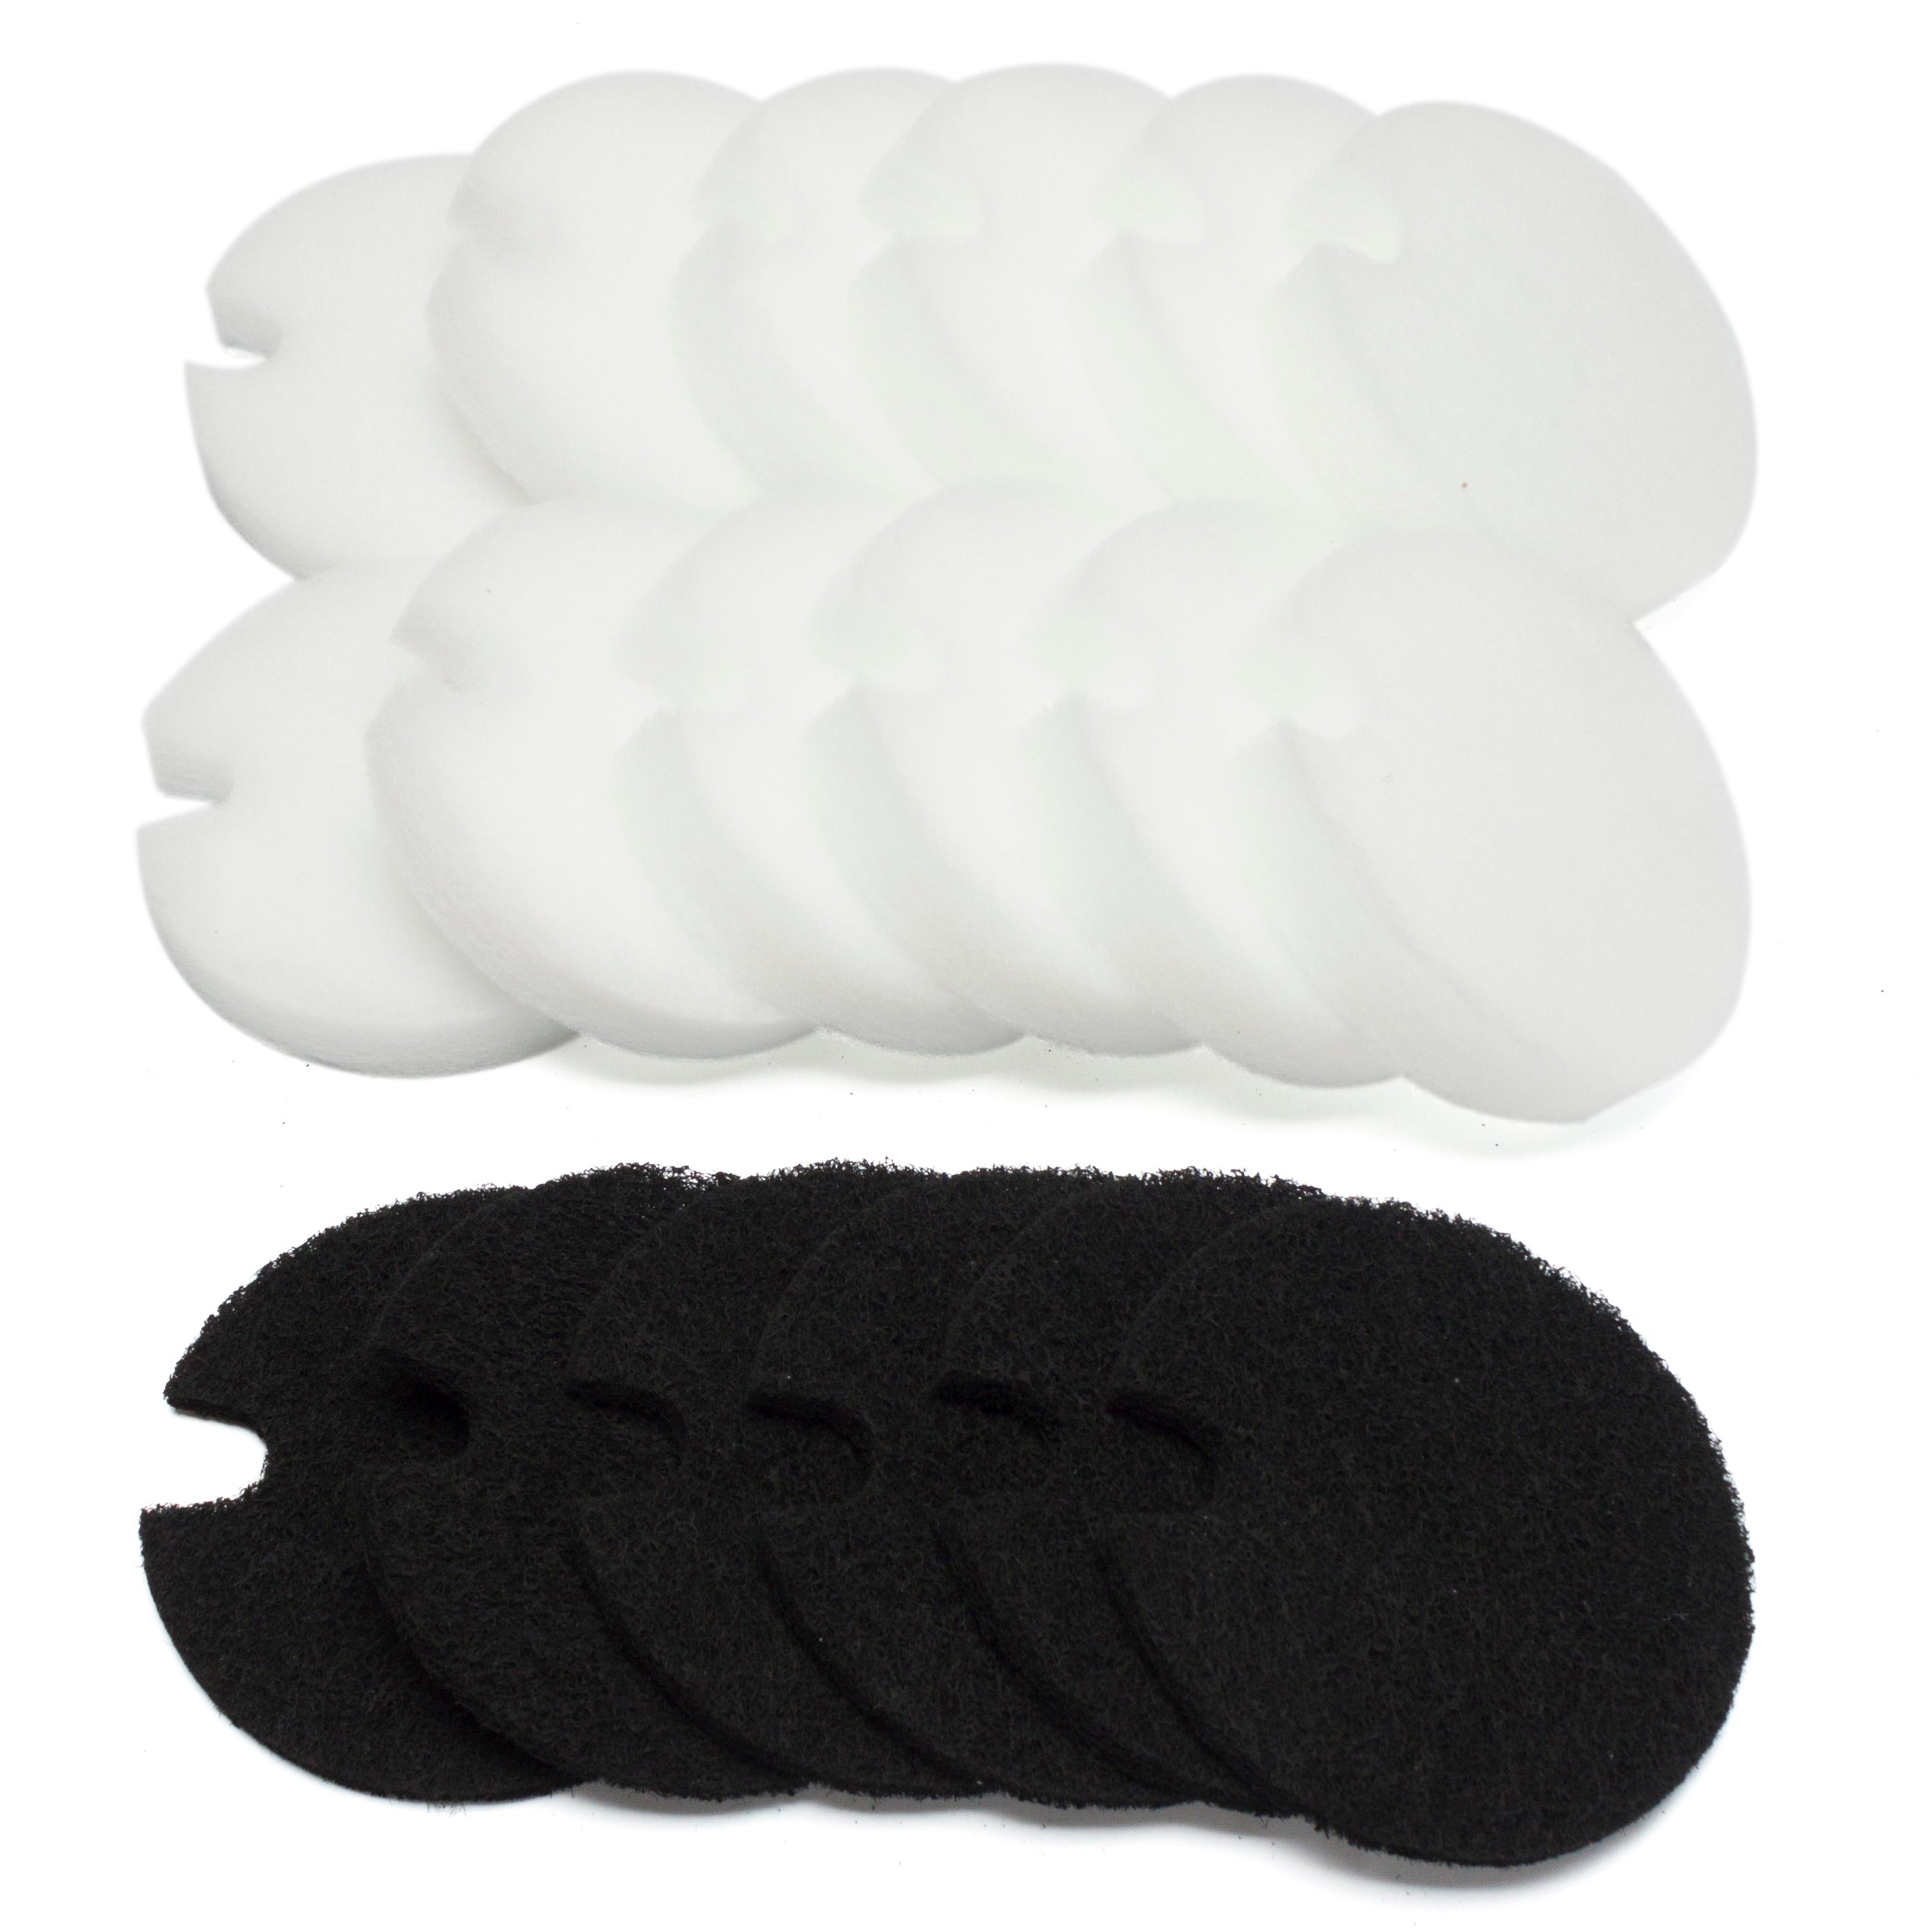 LTWHOME Carbon Filter Pads and Fine Filter Pads Compatible with Eheim Aqua Compact 40/60 (Pack of 18)